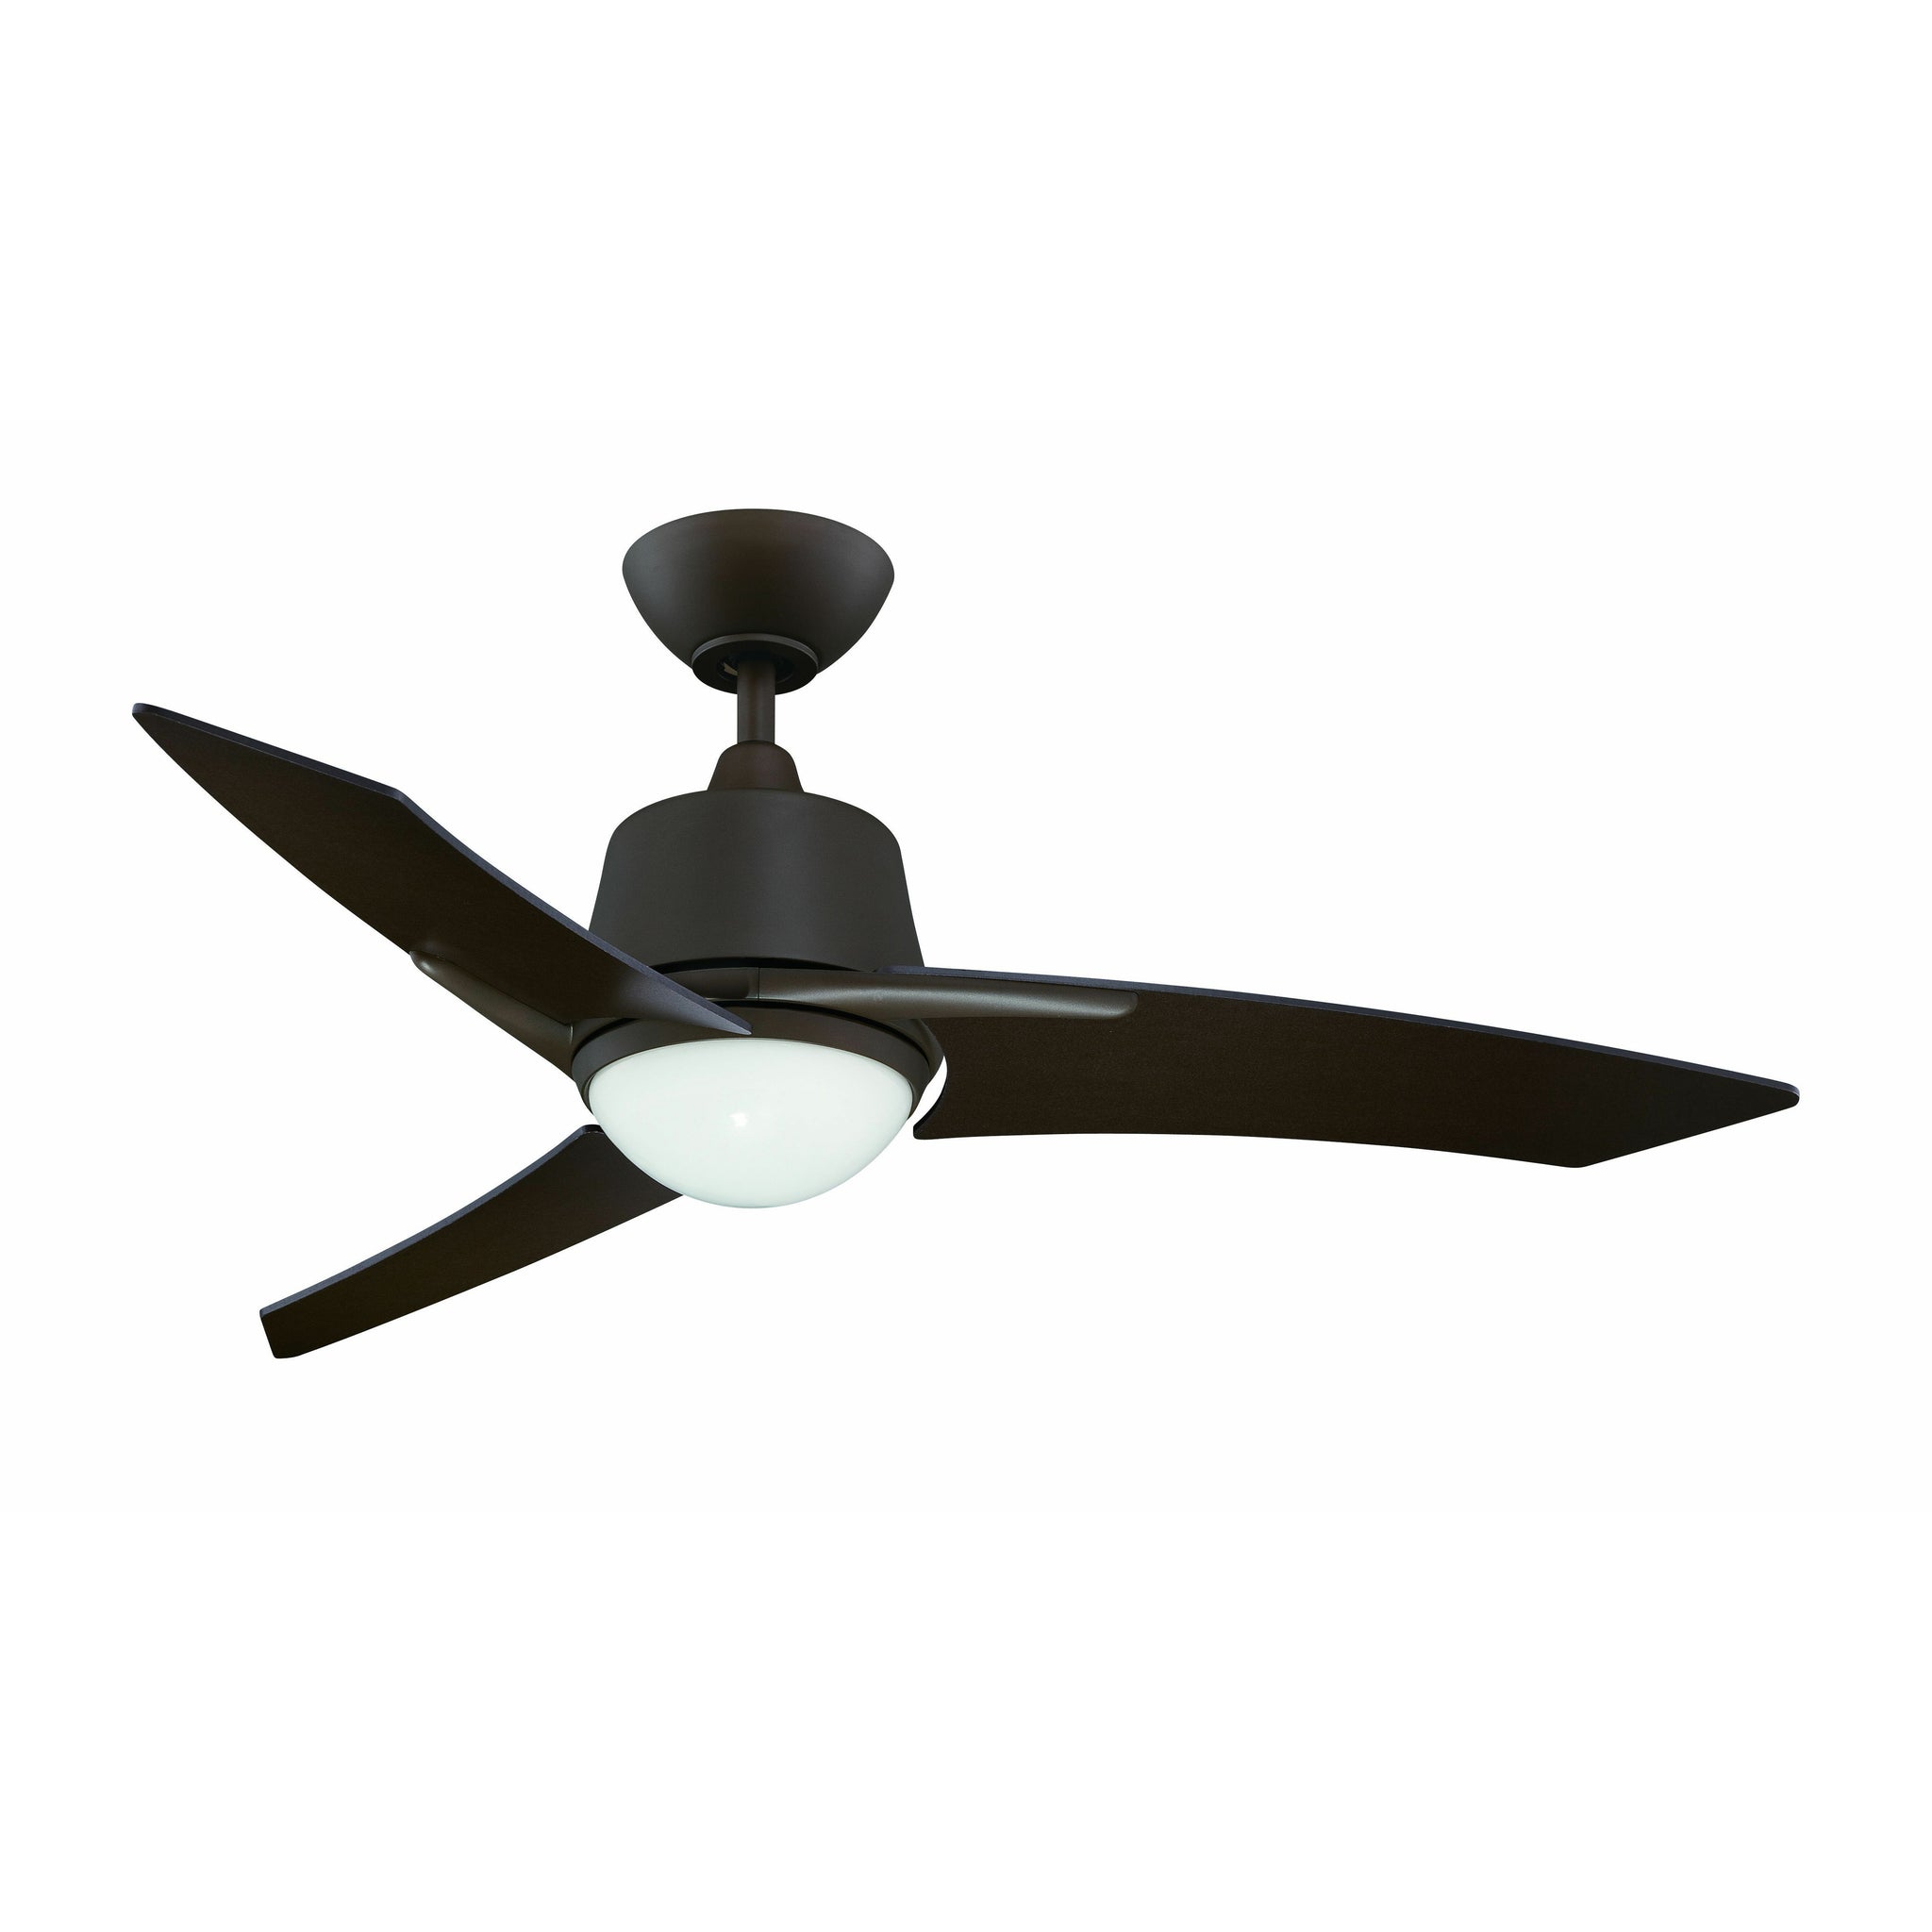 Scimitar Ceiling Fan Oil Rubbed Bronze with matching blades